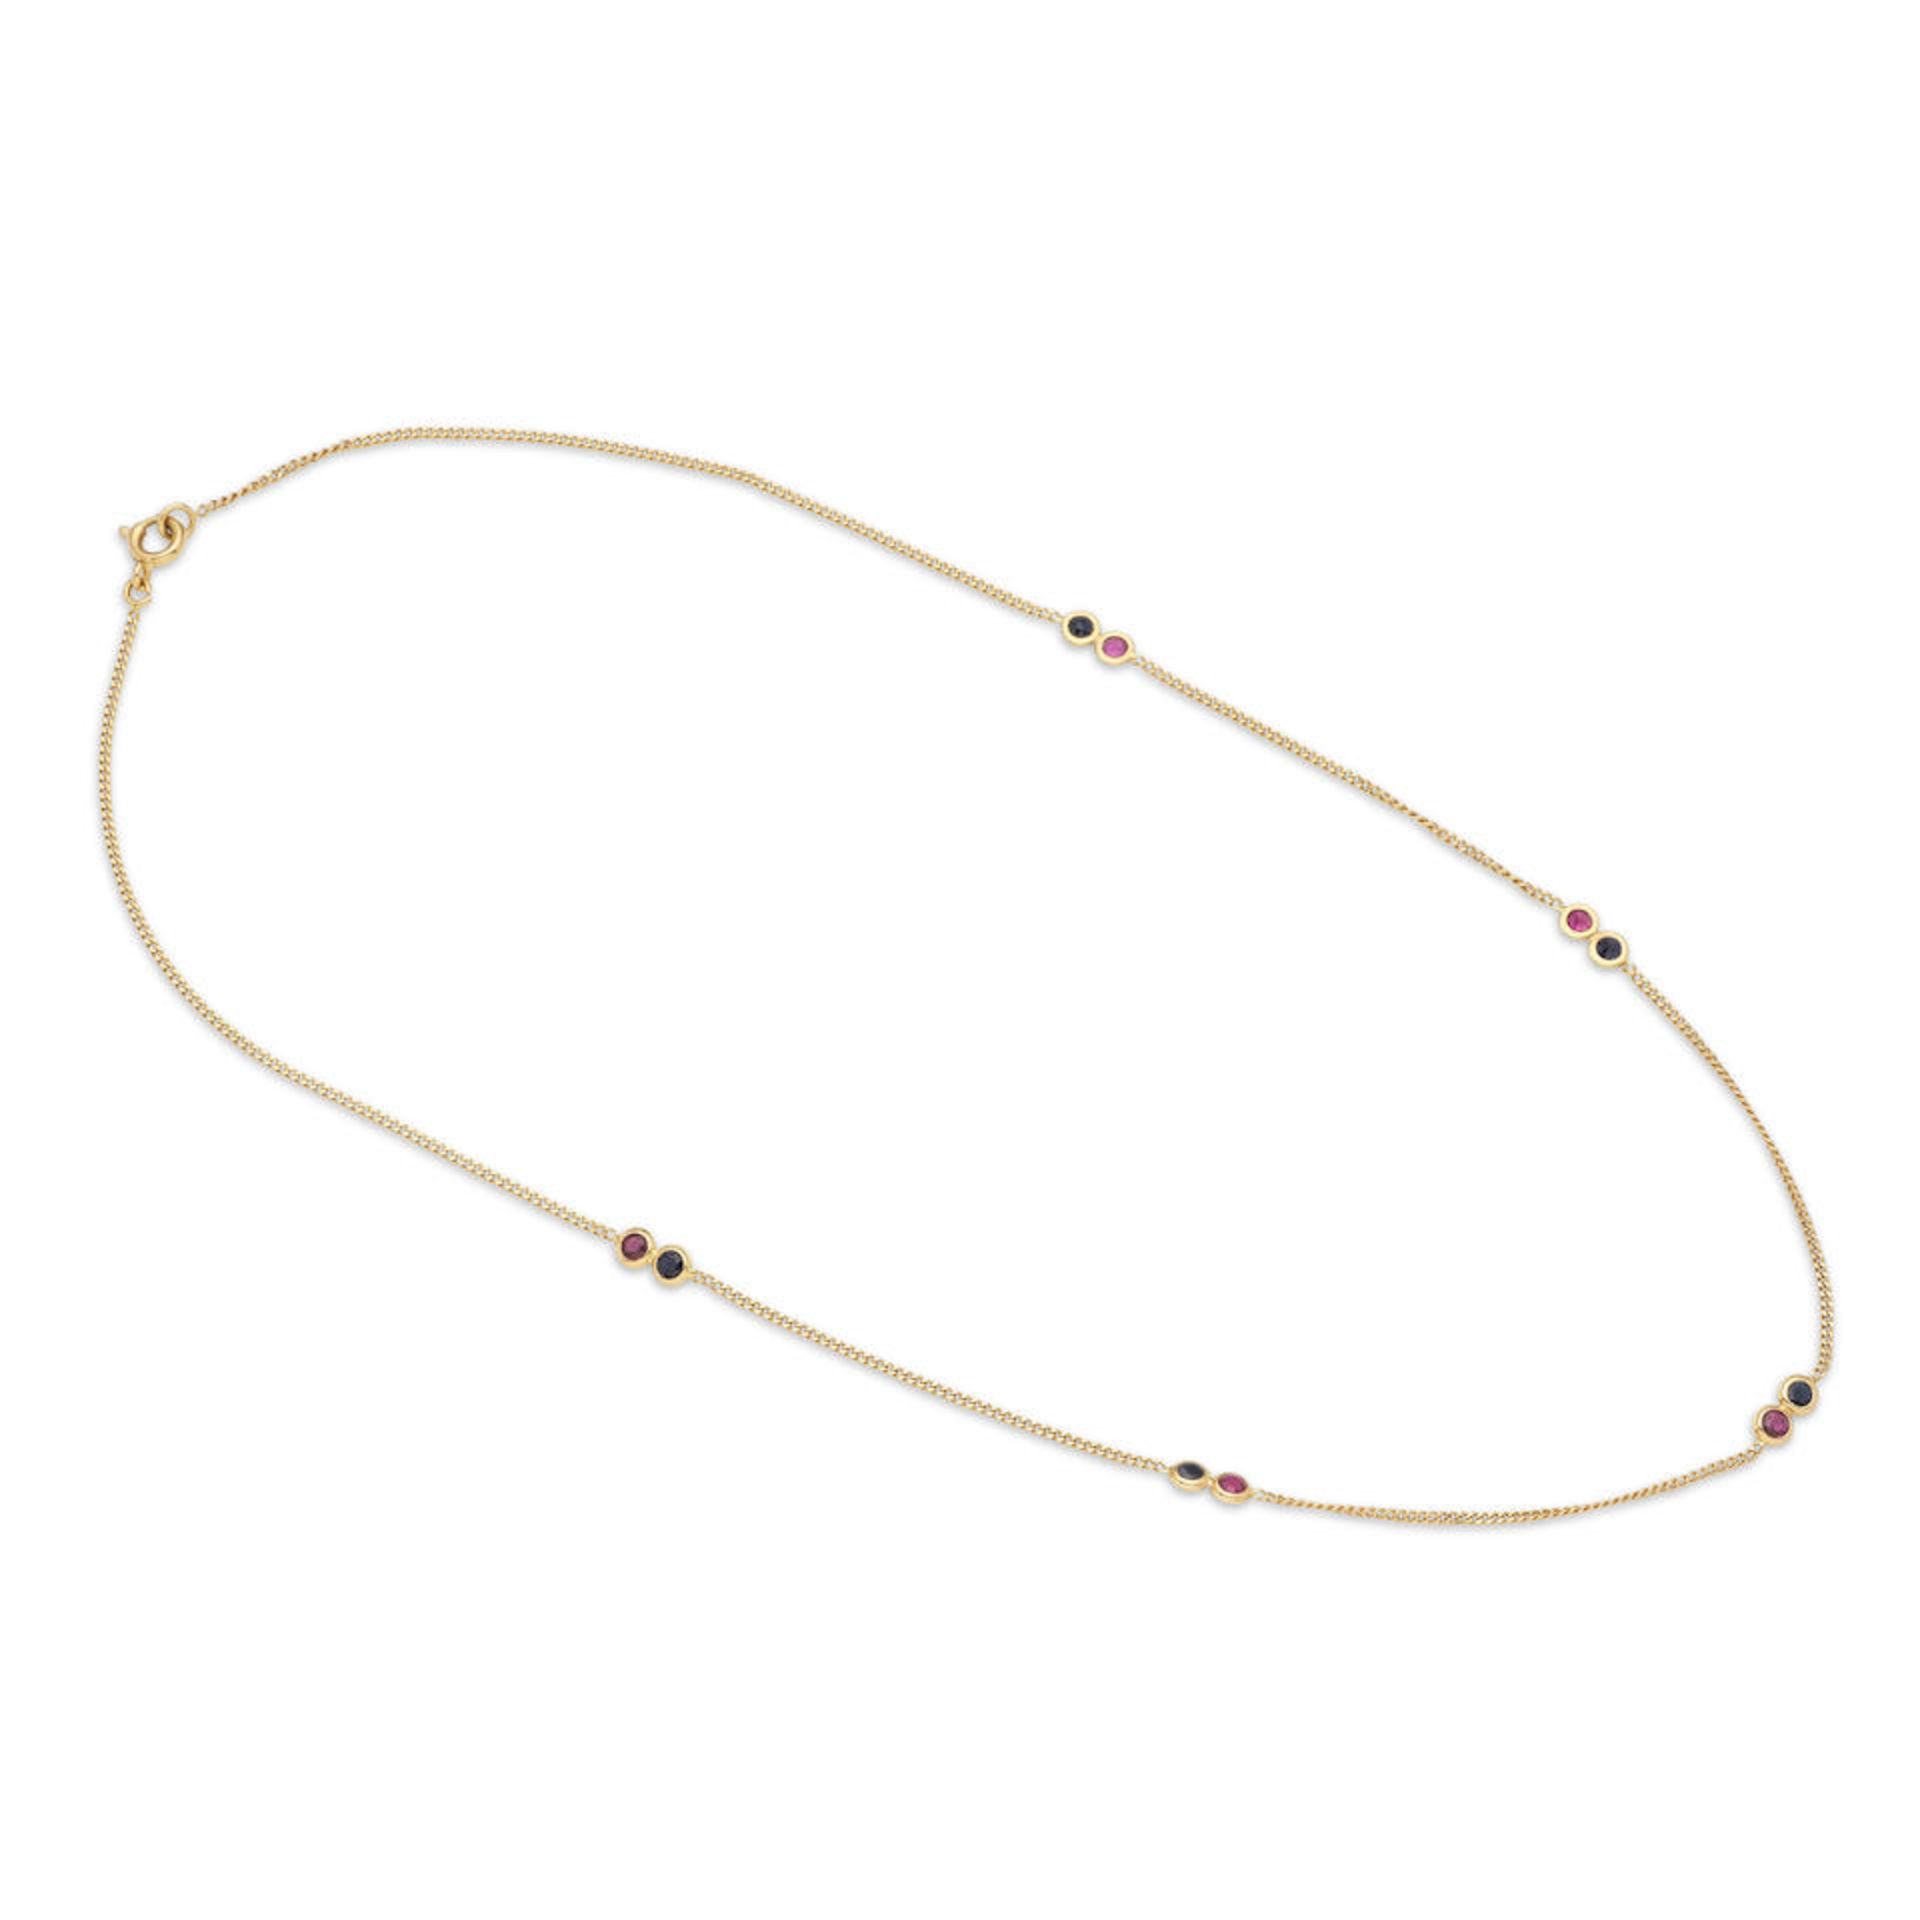 RUBY AND SAPPHIRE NECKLACE COLLIER RUBIS ET SAPHIRS